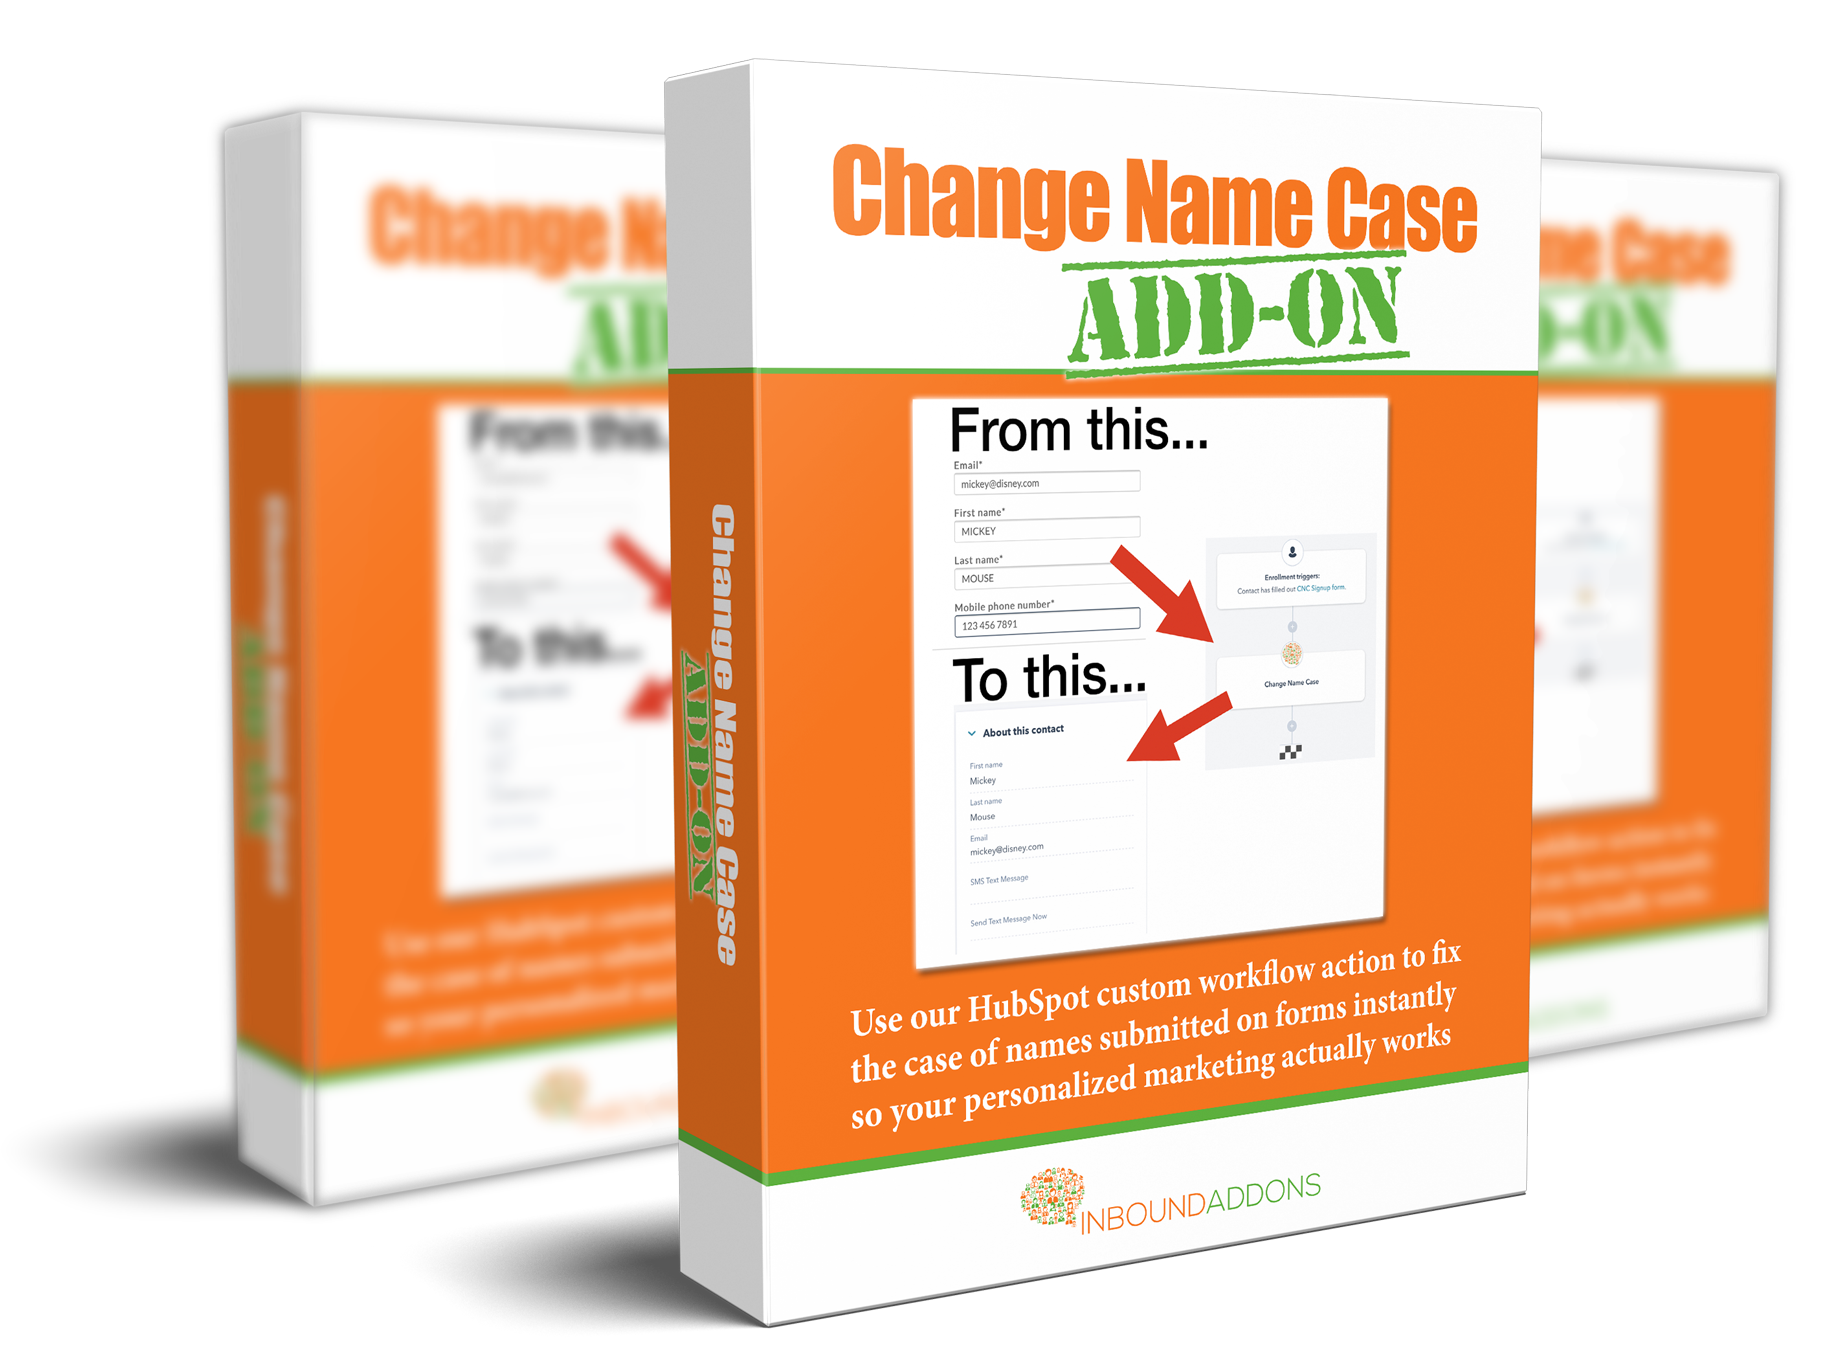 Change name case in HubSpot add-on